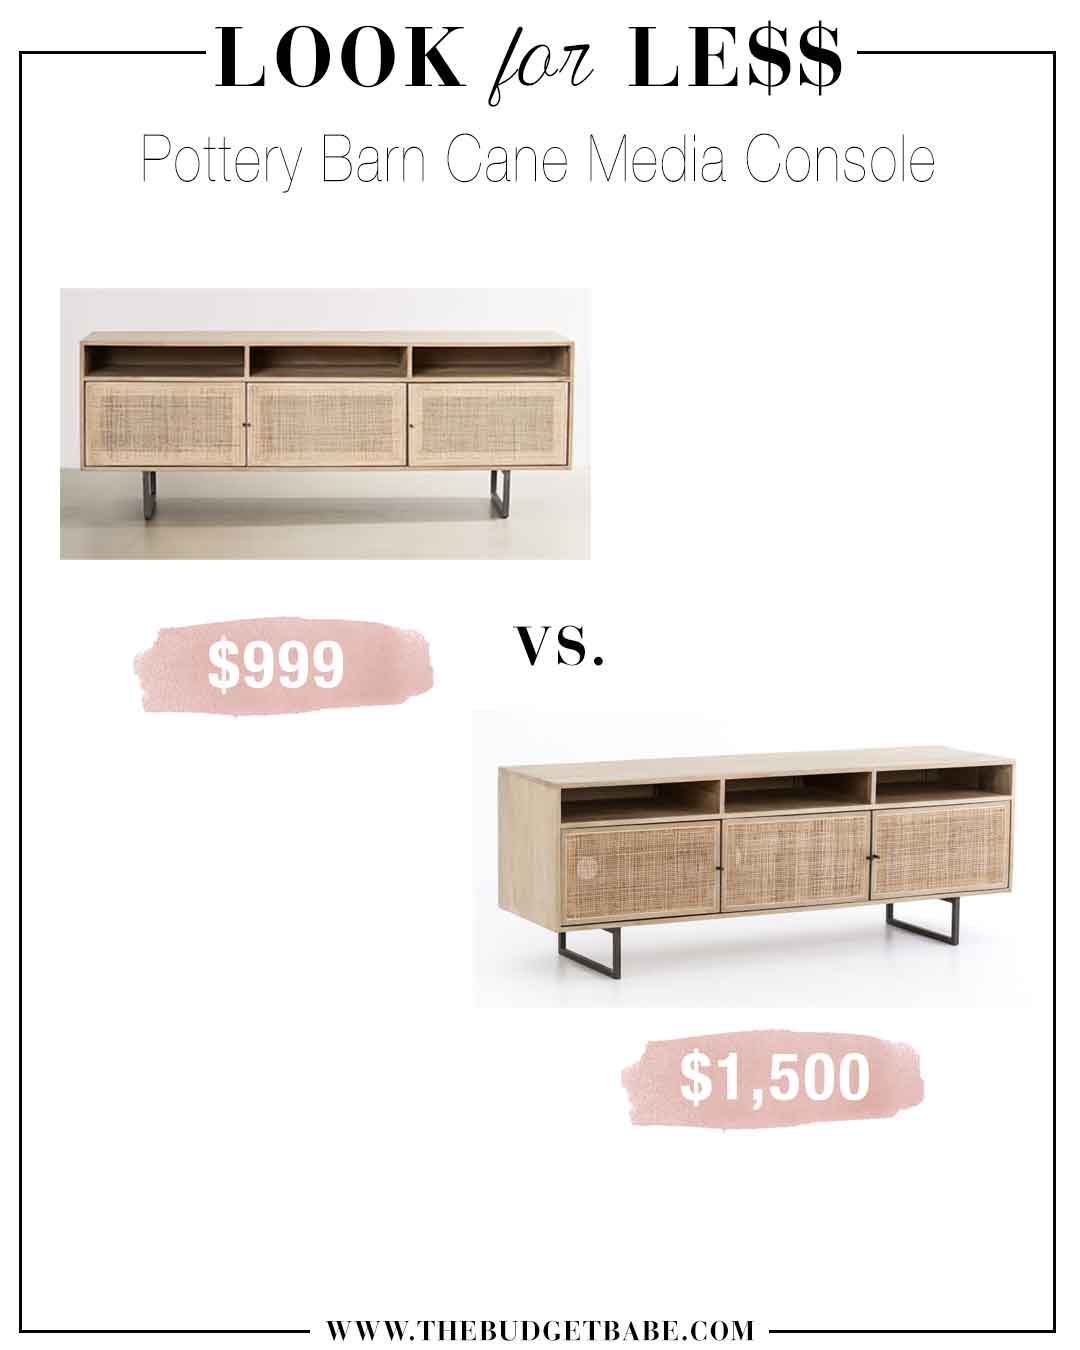 Pottery Barn cane media console is $500 less at UO!